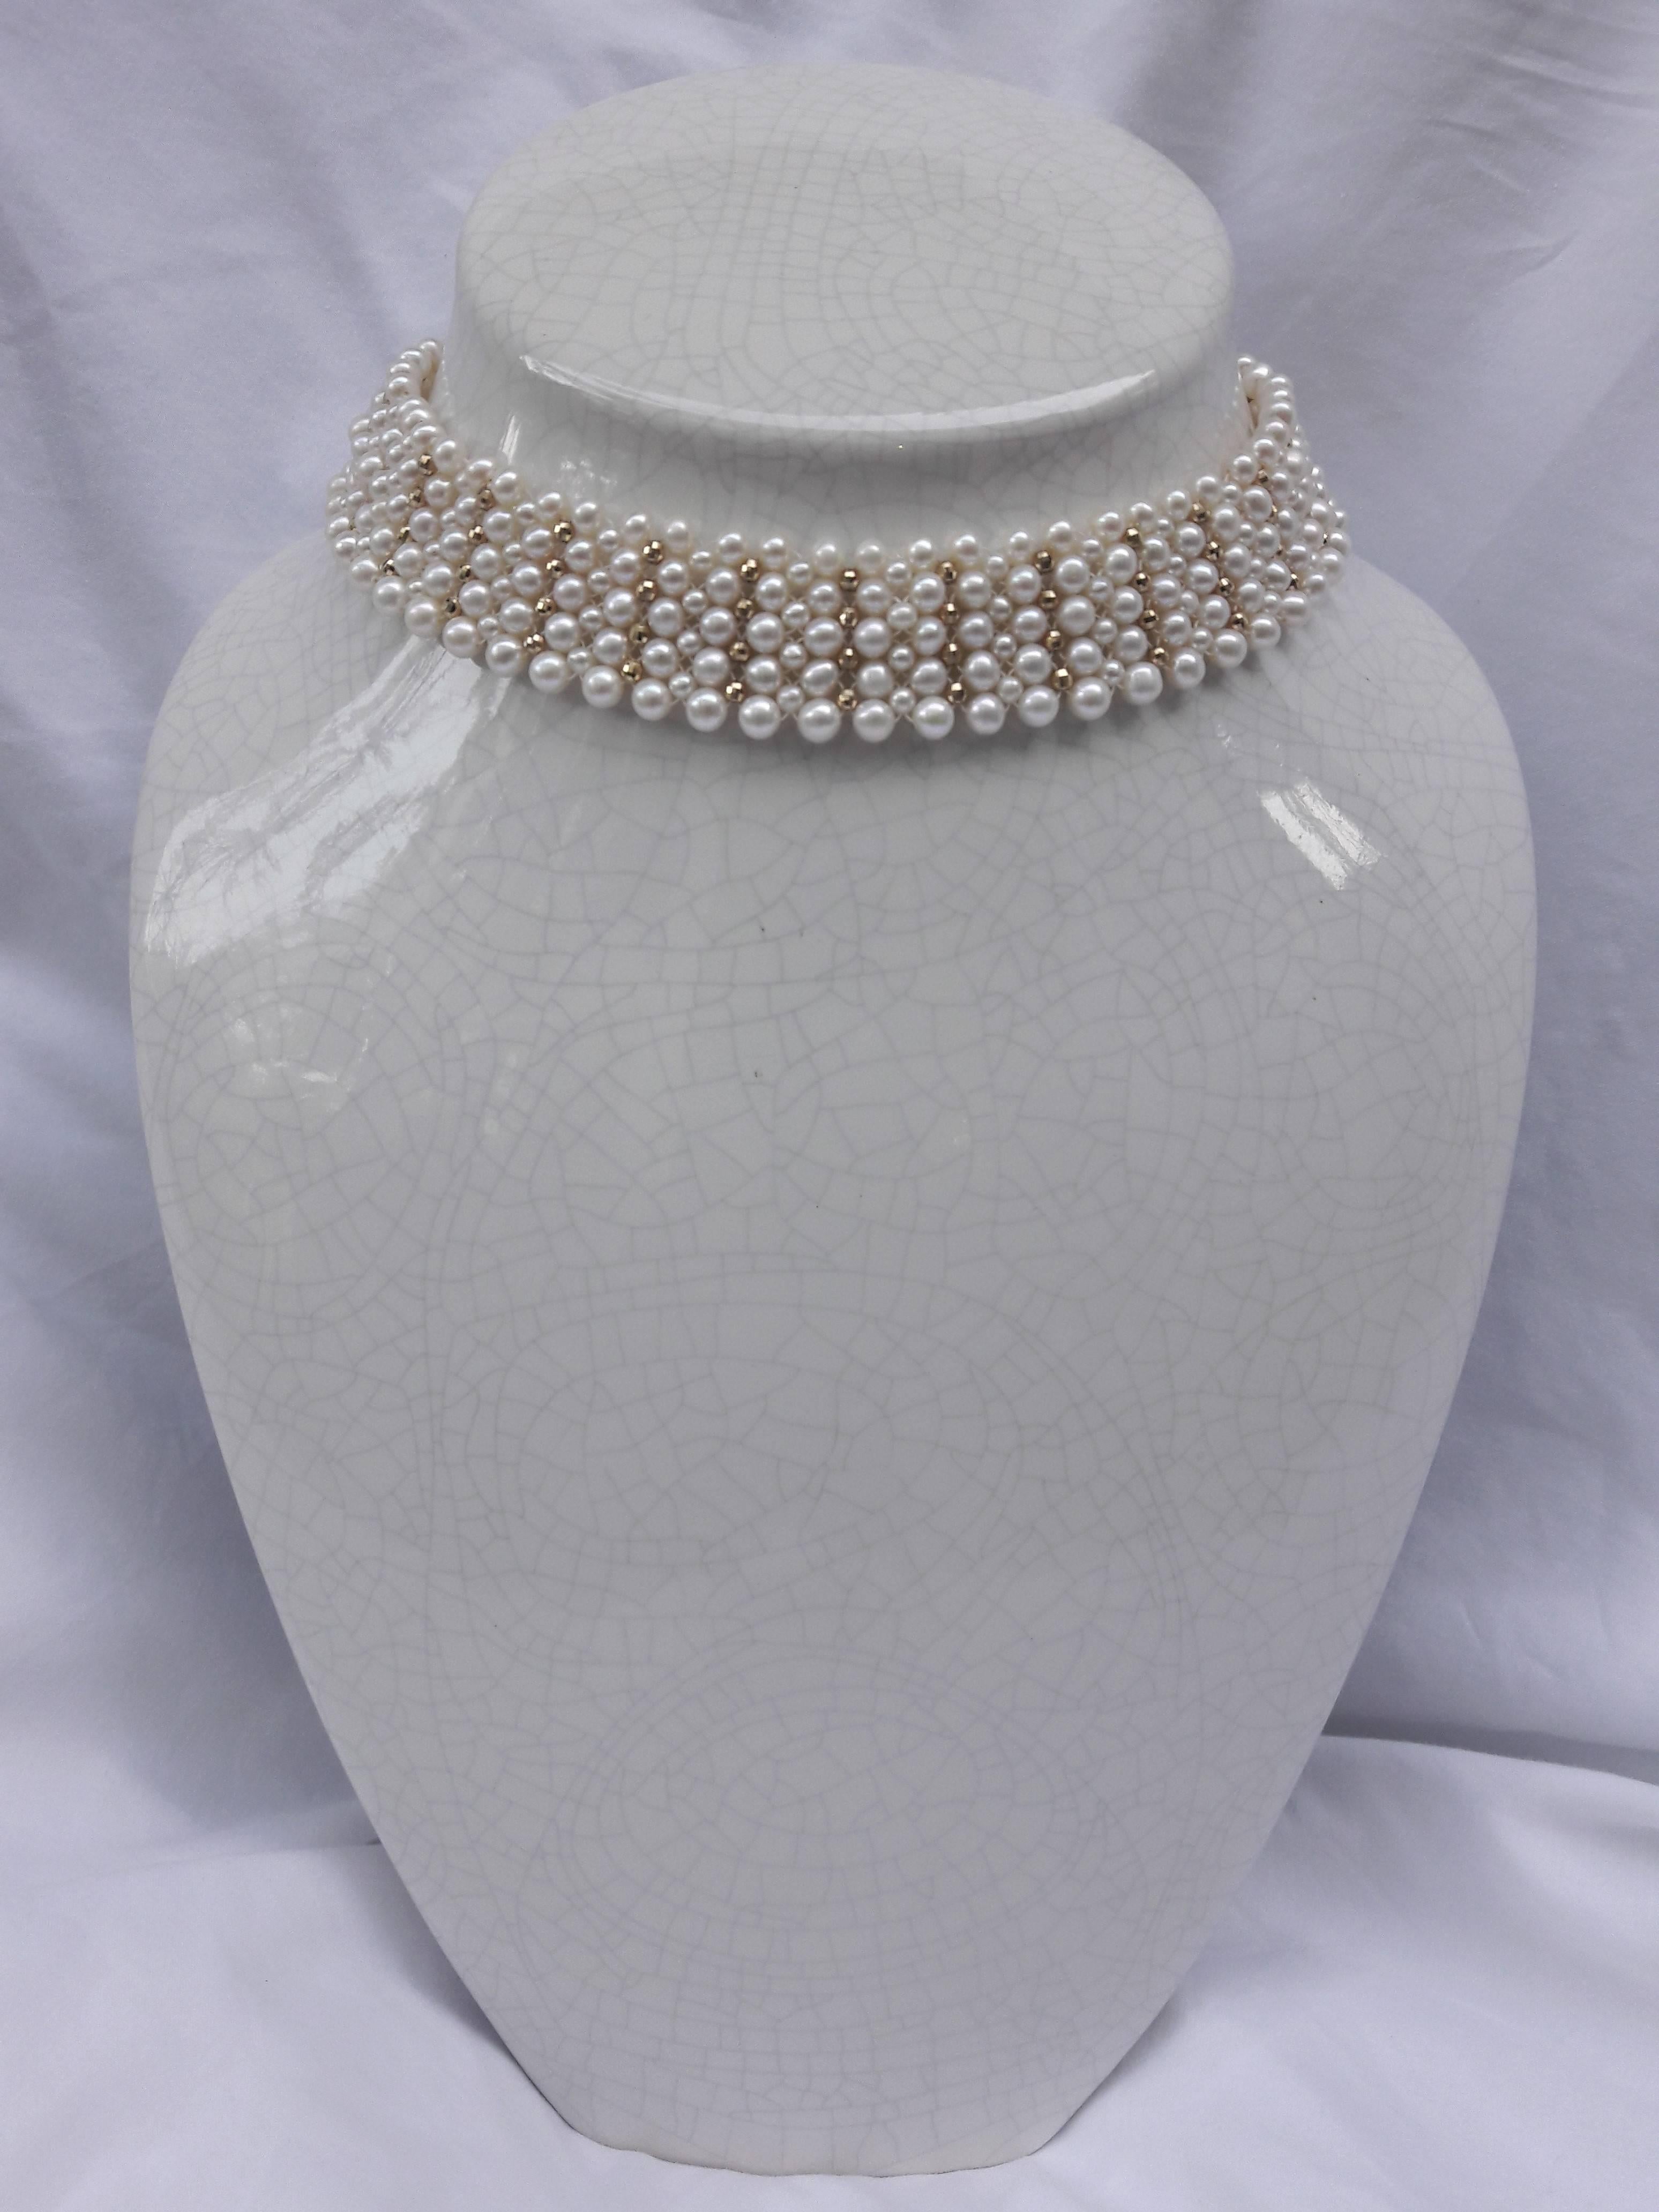 Intricately hand woven choker is made of 3 mm & 4-5 mm pearls with 14 k yellow gold faceted beads. The use of graduated sized pearls allows for natural curvature in design to fit along the form of the neckline. 

Clasp is made of 14 k yellow gold